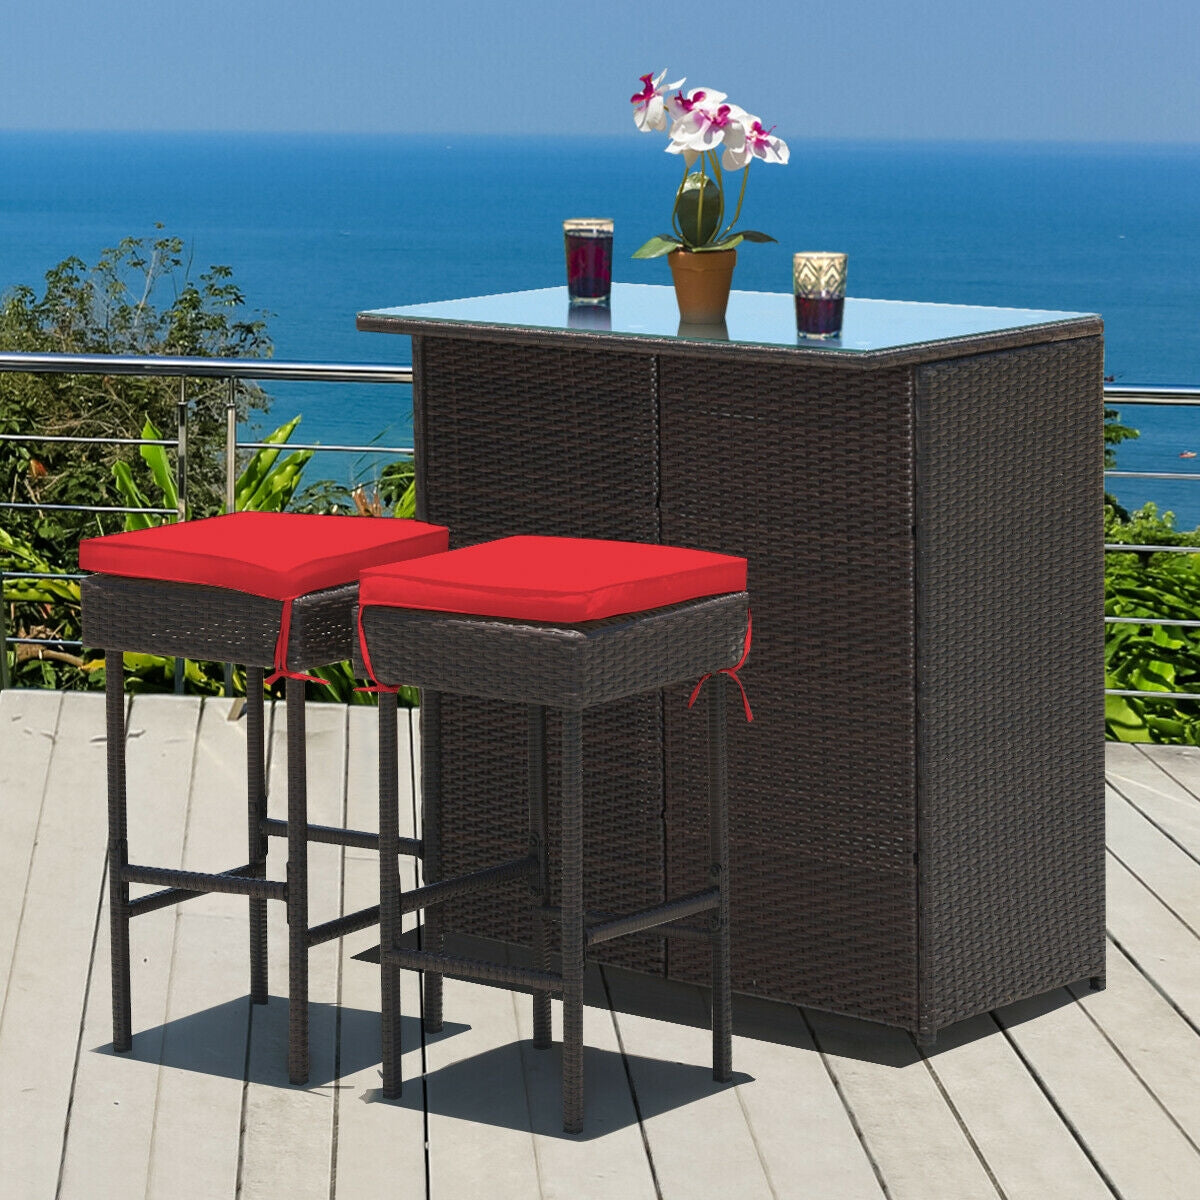 3 Pieces Patio Rattan Wicker Bar Table Stools Dining Set-Red